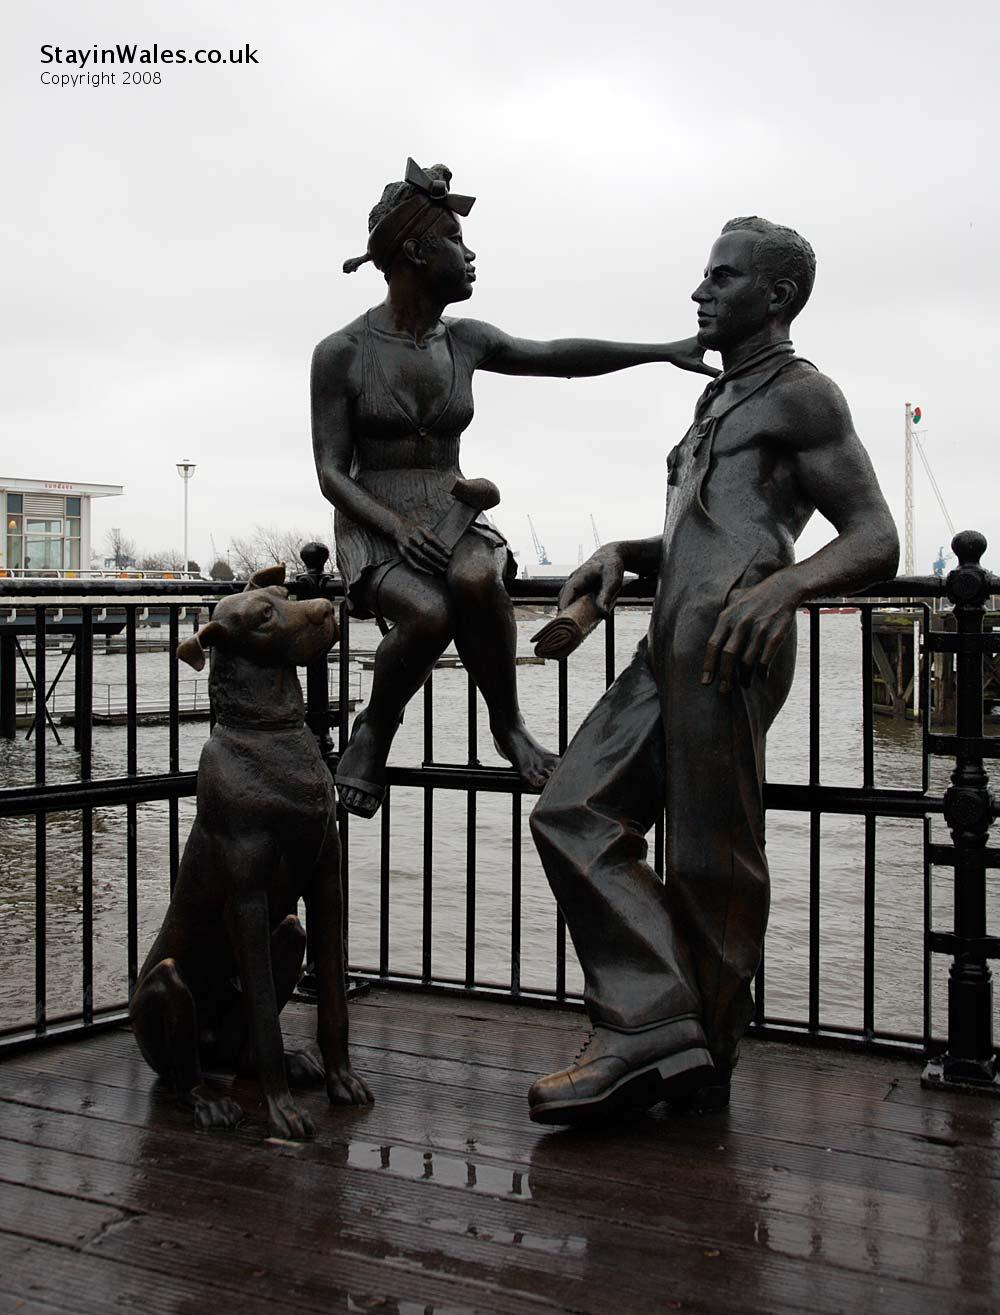 Couple and dog sculpture, Mermaid Quay